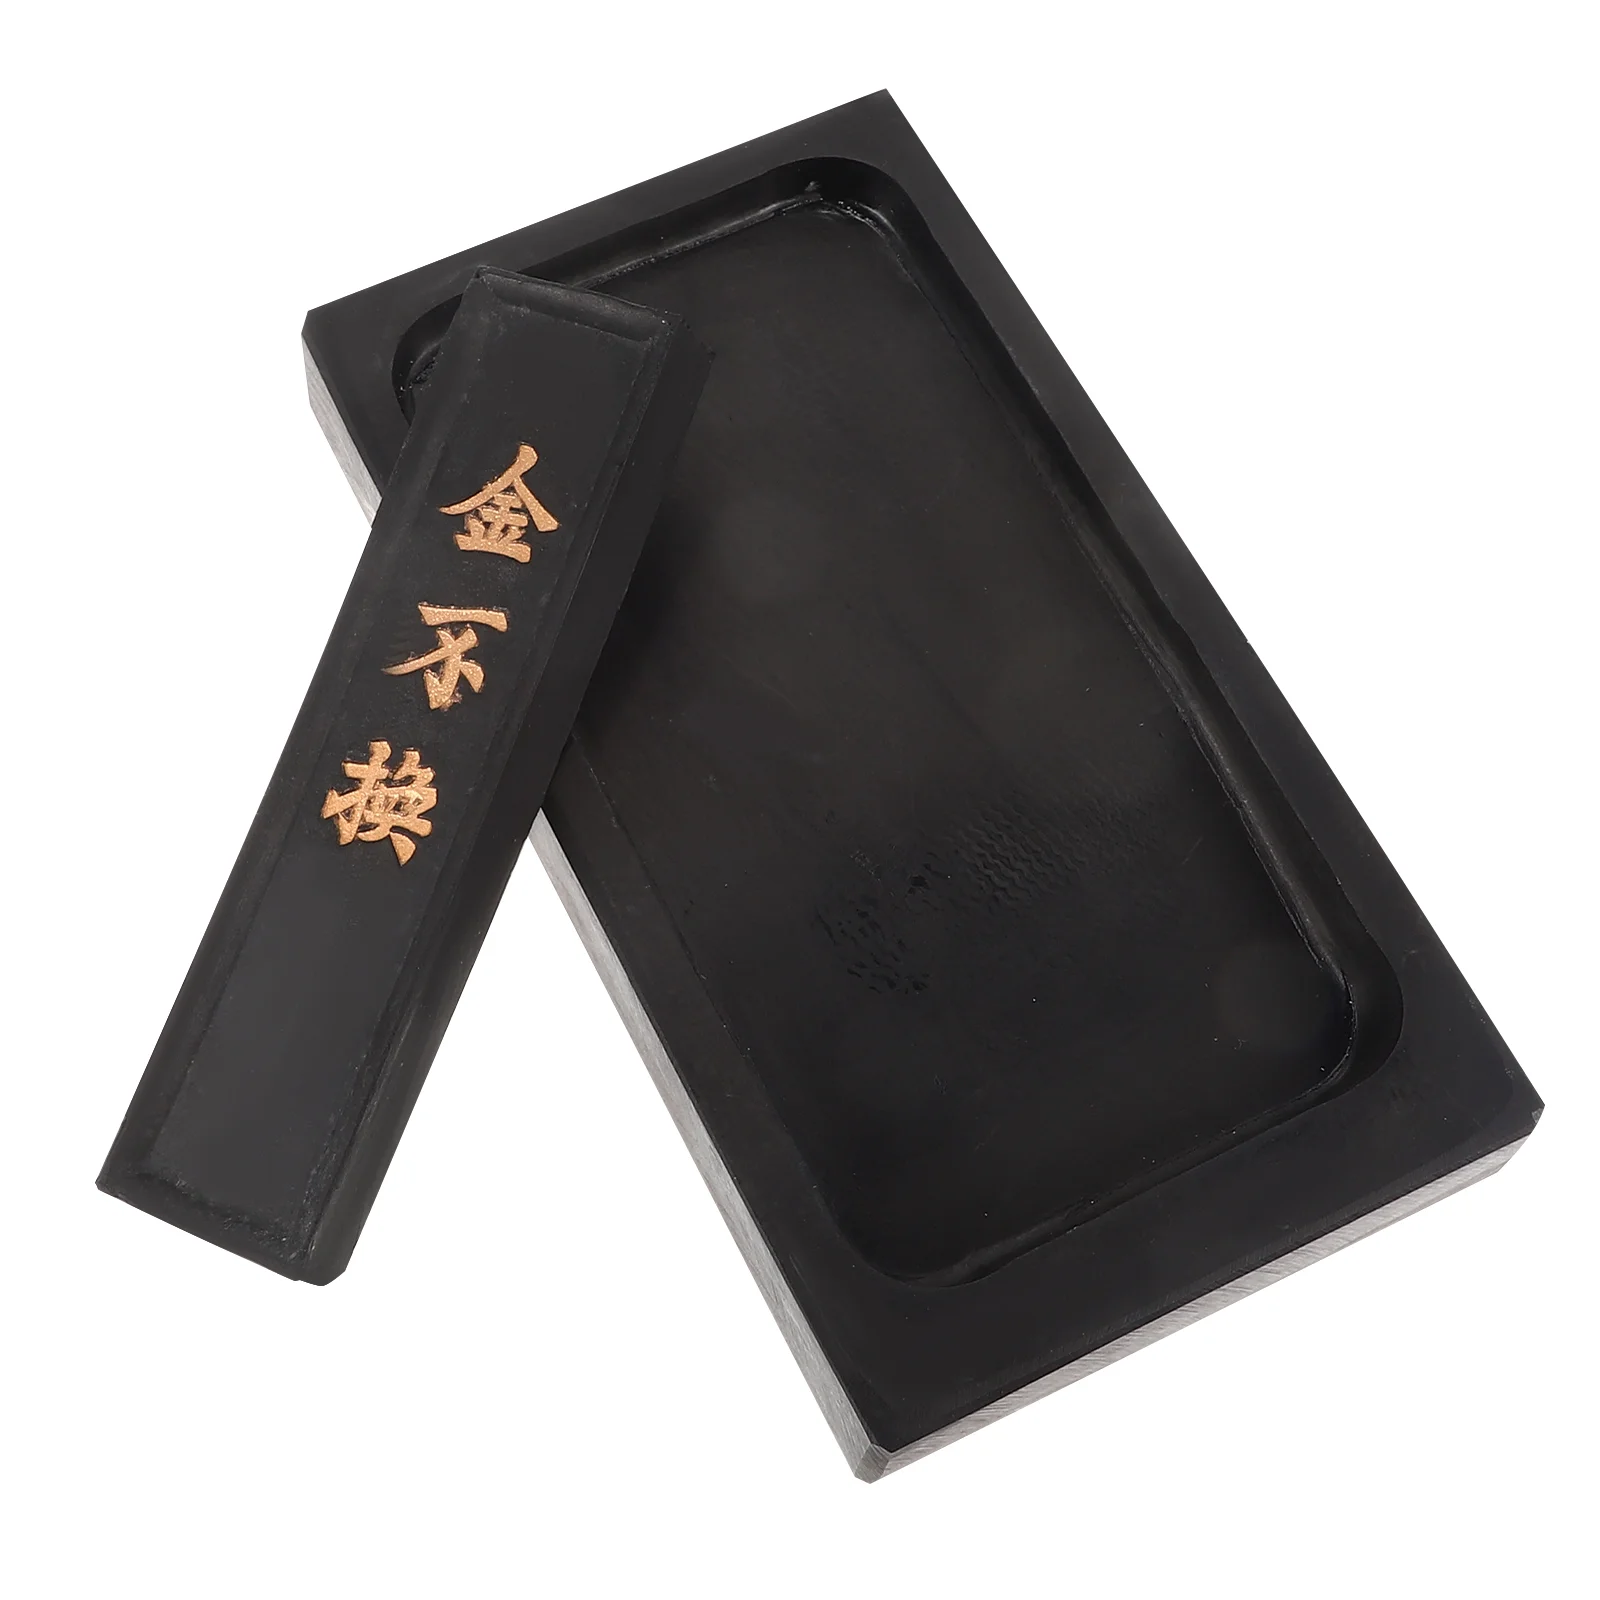 

2Pcs Chinese Calligraphy Painting Inkstone Ink Natural Stone Wavy Calligraphy Accessory for Calligraphy Practicing 5 Inch